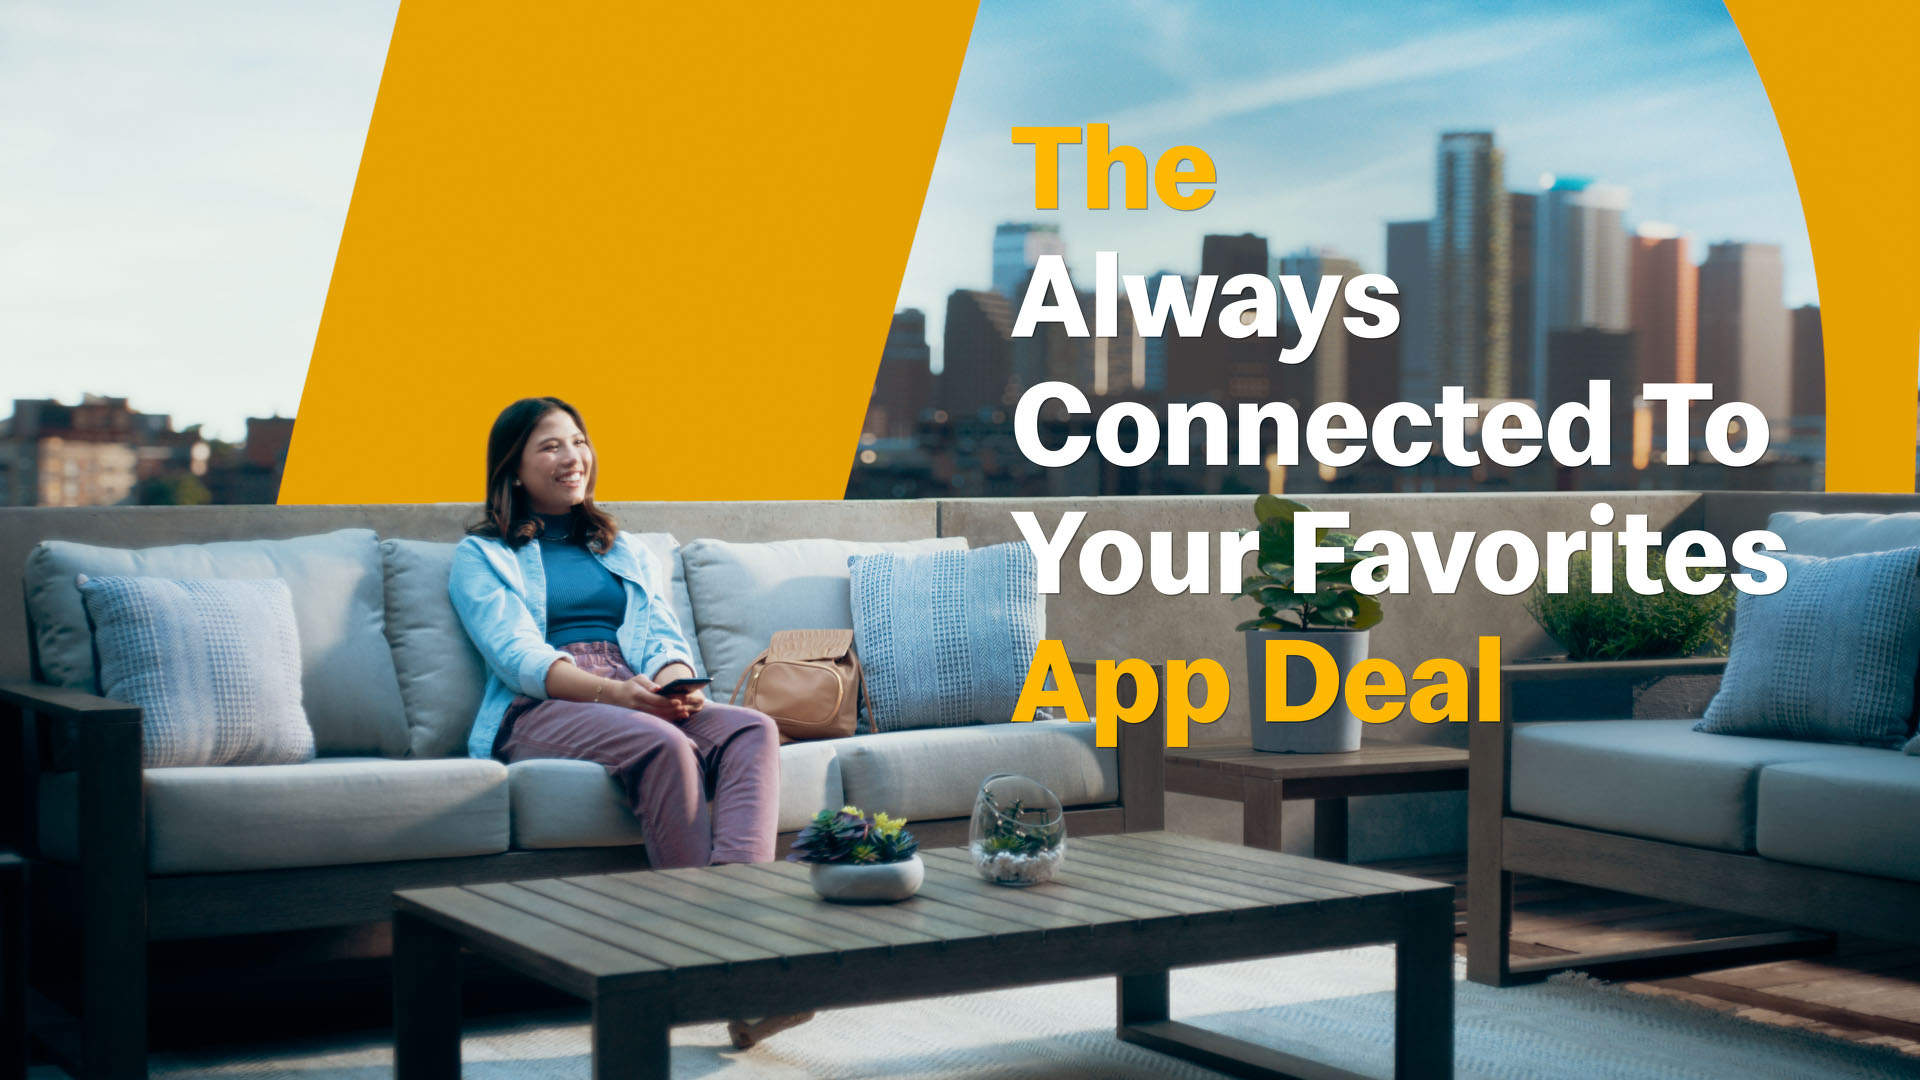 A woman sitting on a rooftop patio with a McDonald's arch extending behind her. The text "The always connected to your favorites app deal" is superimposed.